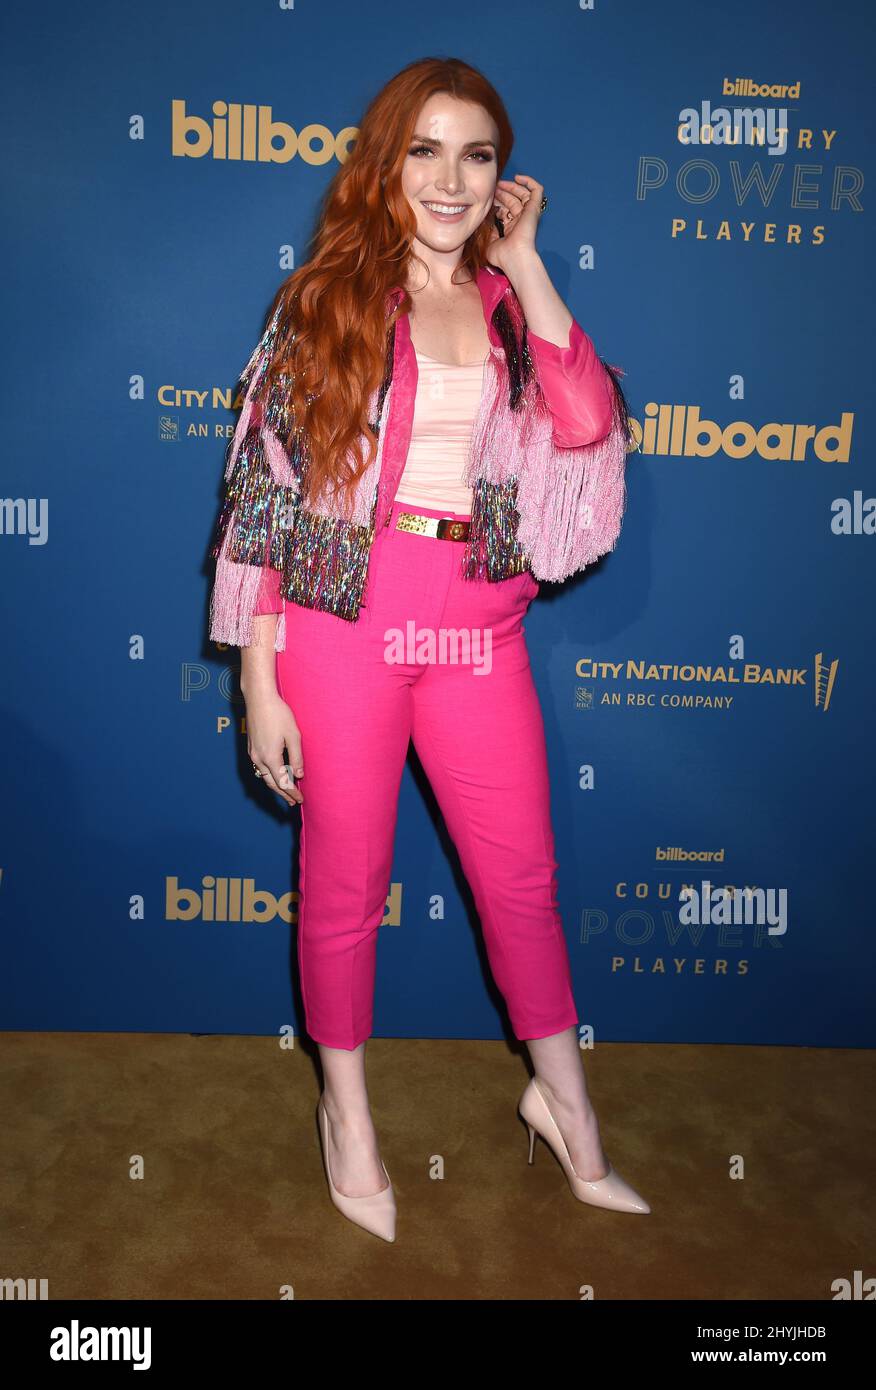 Caylee Hammack attending the 2019 Billboard Country Power Players in Nashville Stock Photo